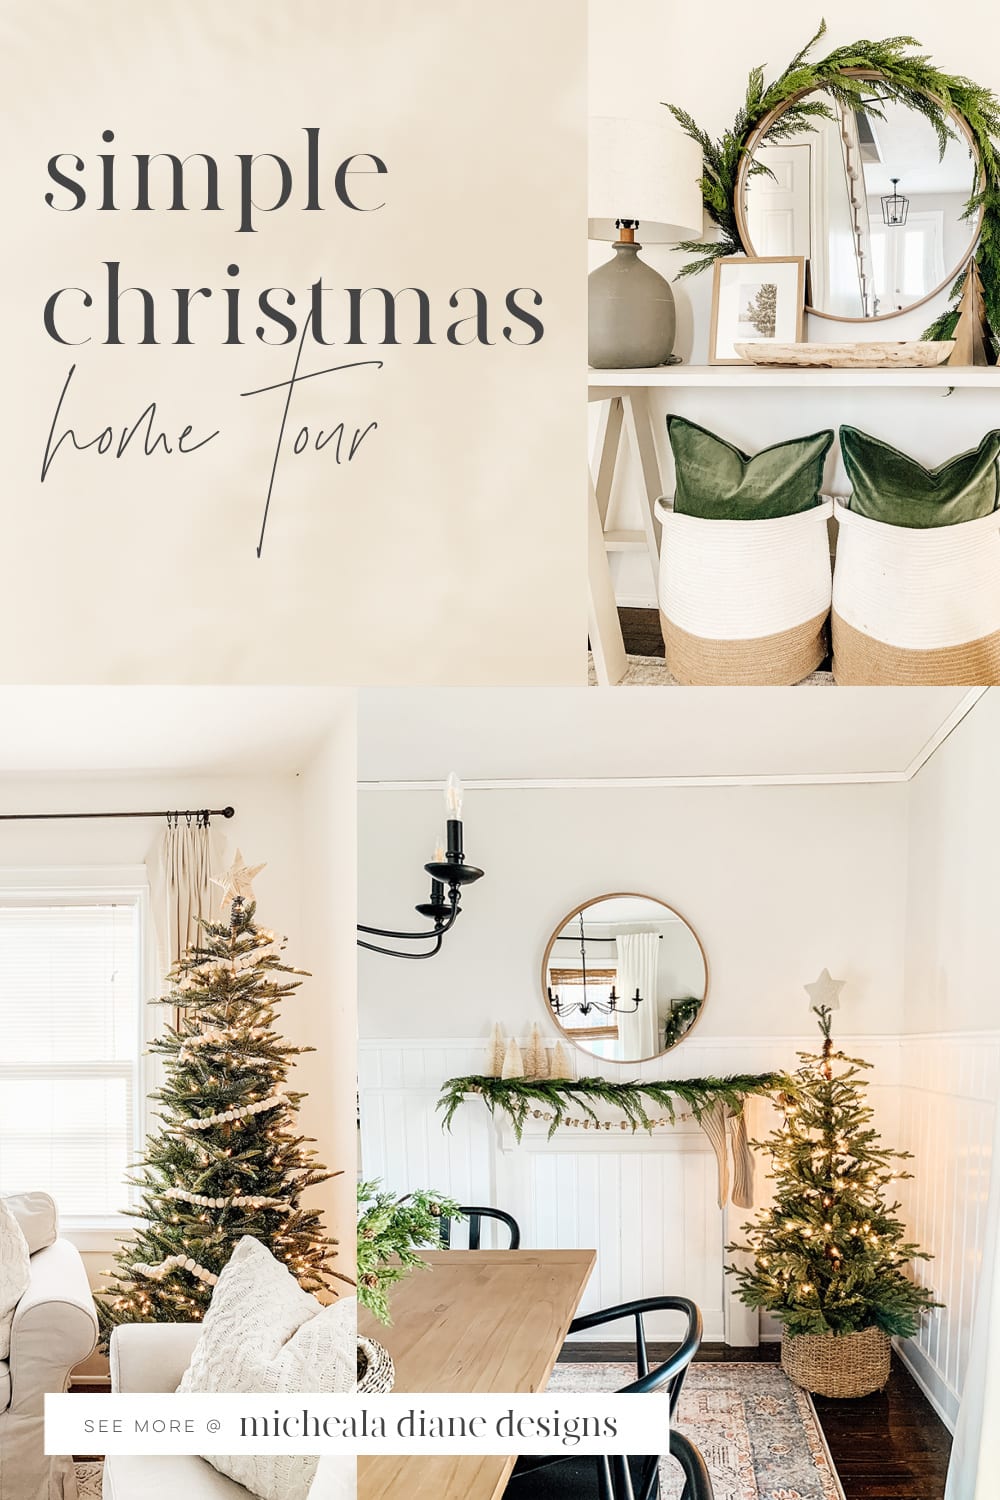 https://michealadianedesigns.com/wp-content/uploads/2021/12/Simple-Christmas-Home-Tour.jpg